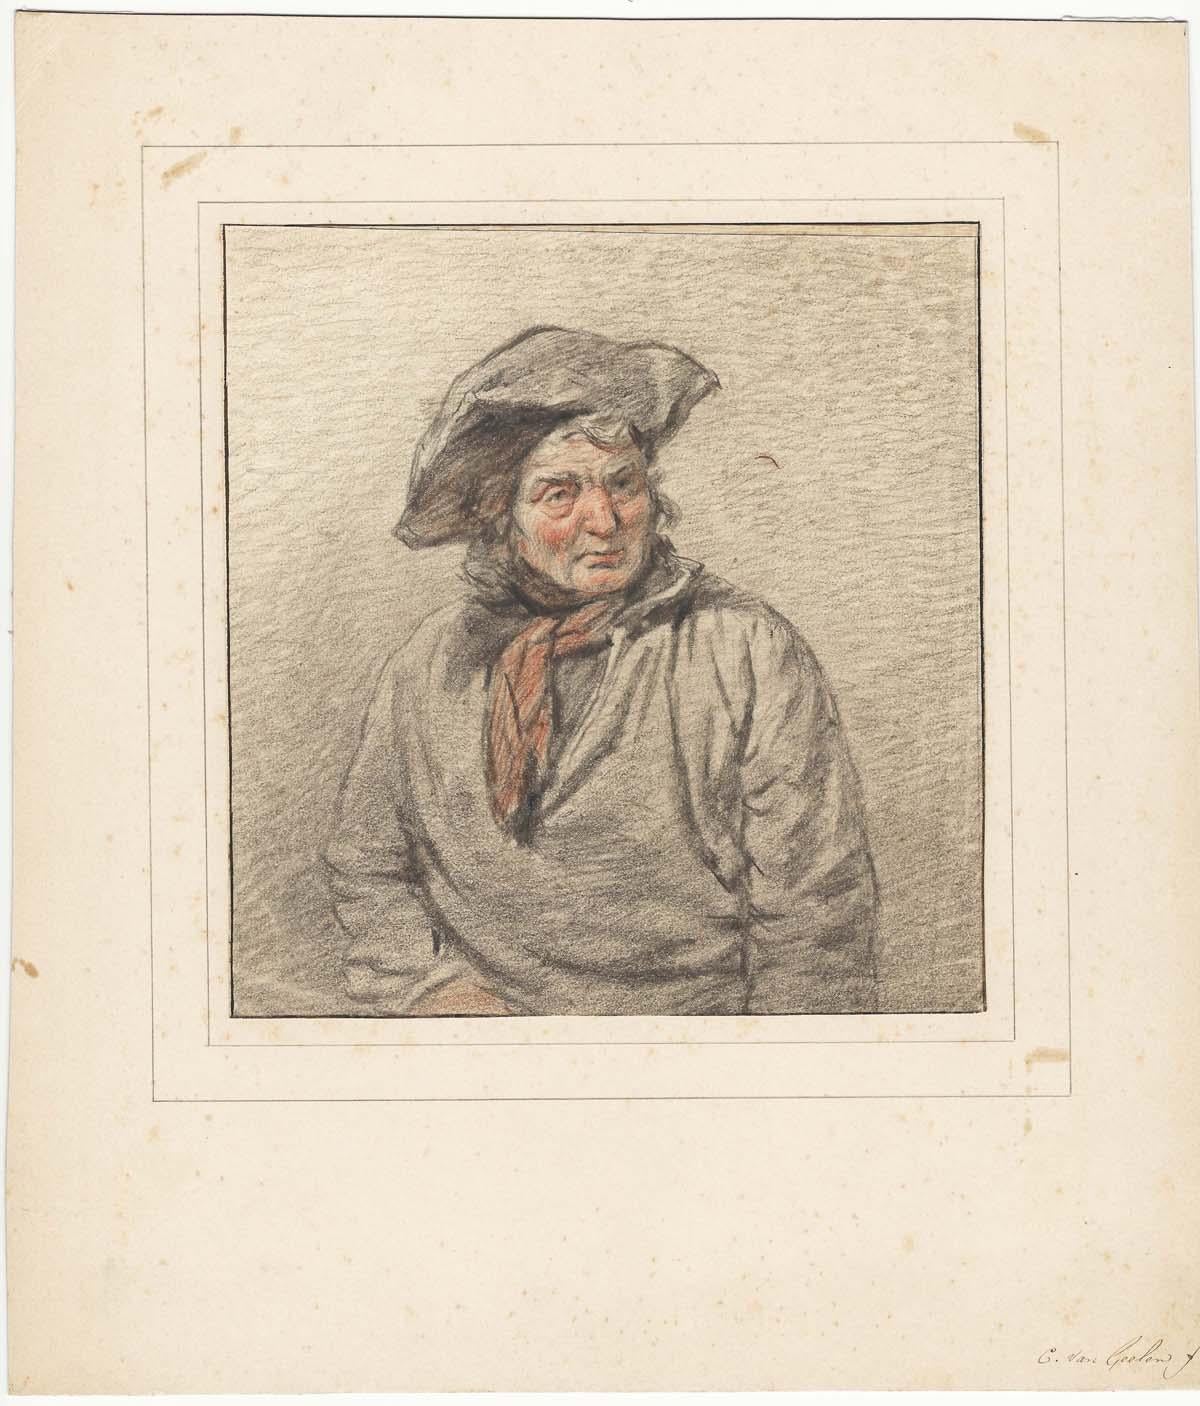 Christiaan van Geelen II (Utrecht 1794 – 1826 Utrecht)

Study of the Head of a Man

Black and red chalk, black ink framing lines, on wove paper, 193 x 185 mm (7.6 x 7.3 inch), hinged onto early mount with framing lines in pencil

Signed ‘Van geelen.